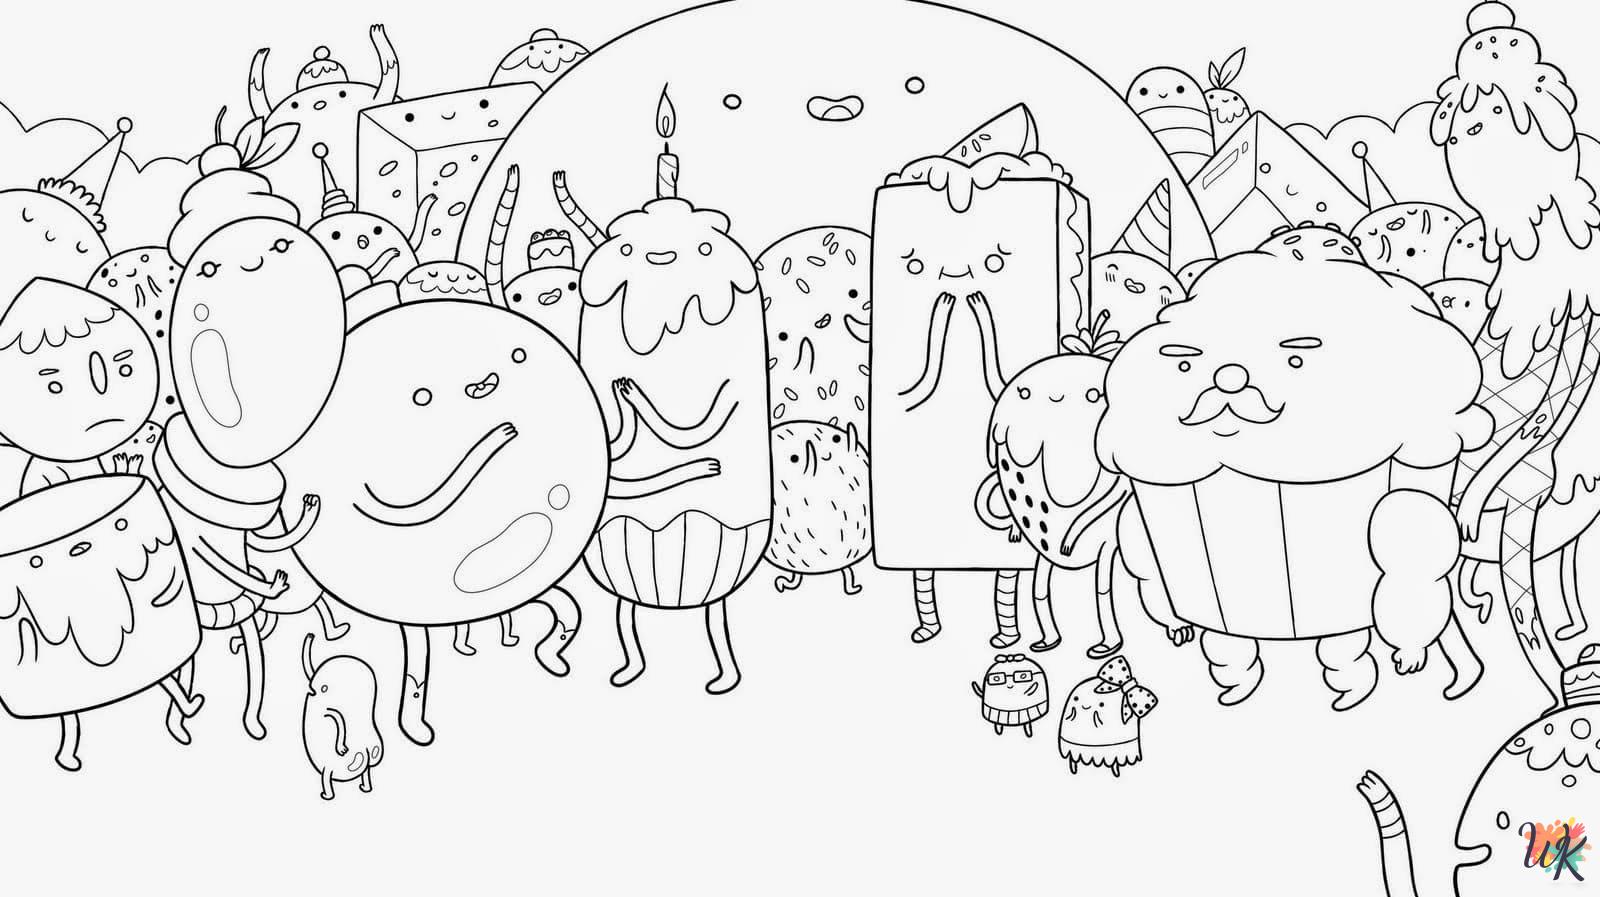 Adventure Time themed coloring pages